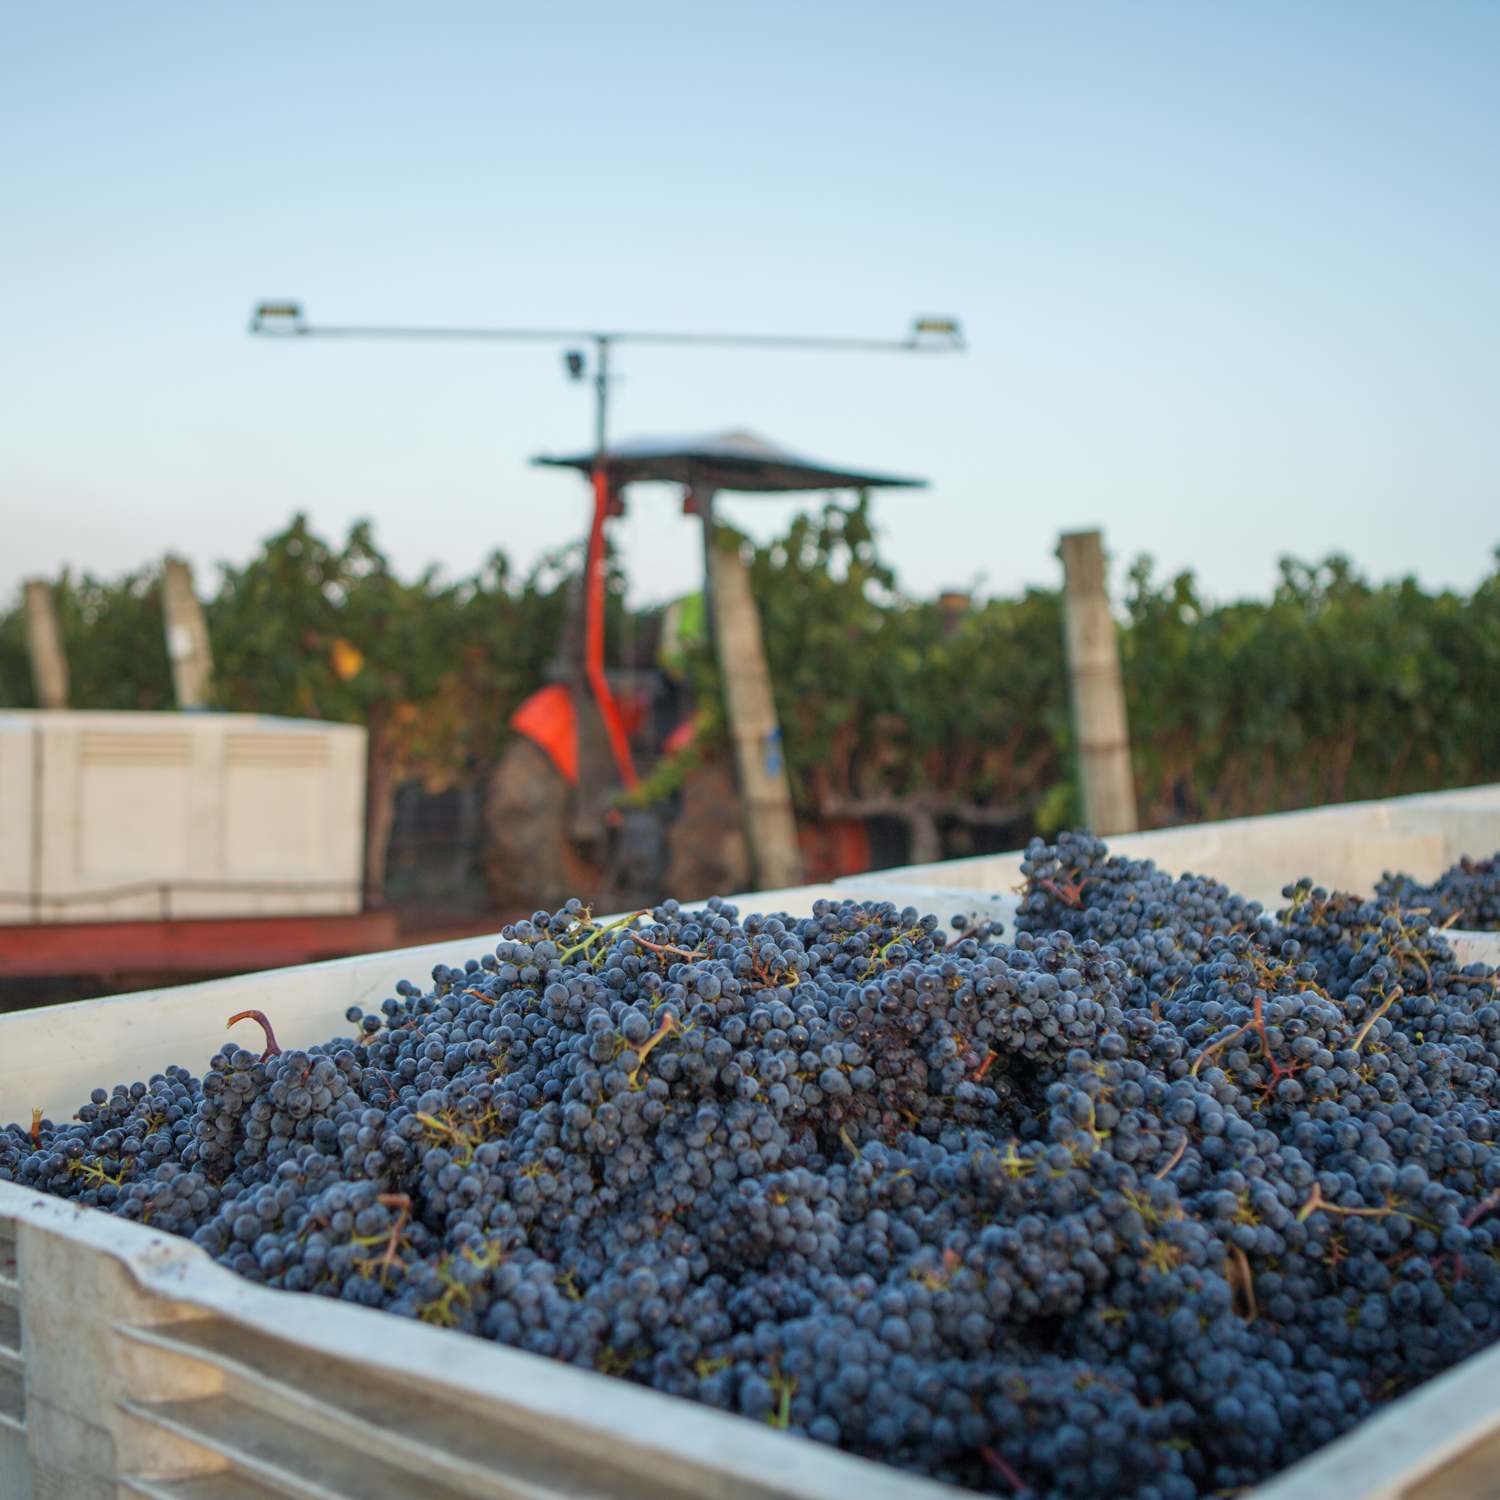 The 2014 Napa Valley wine grape harvest is expected to produce the Valley's third consecutive high quality vintage.